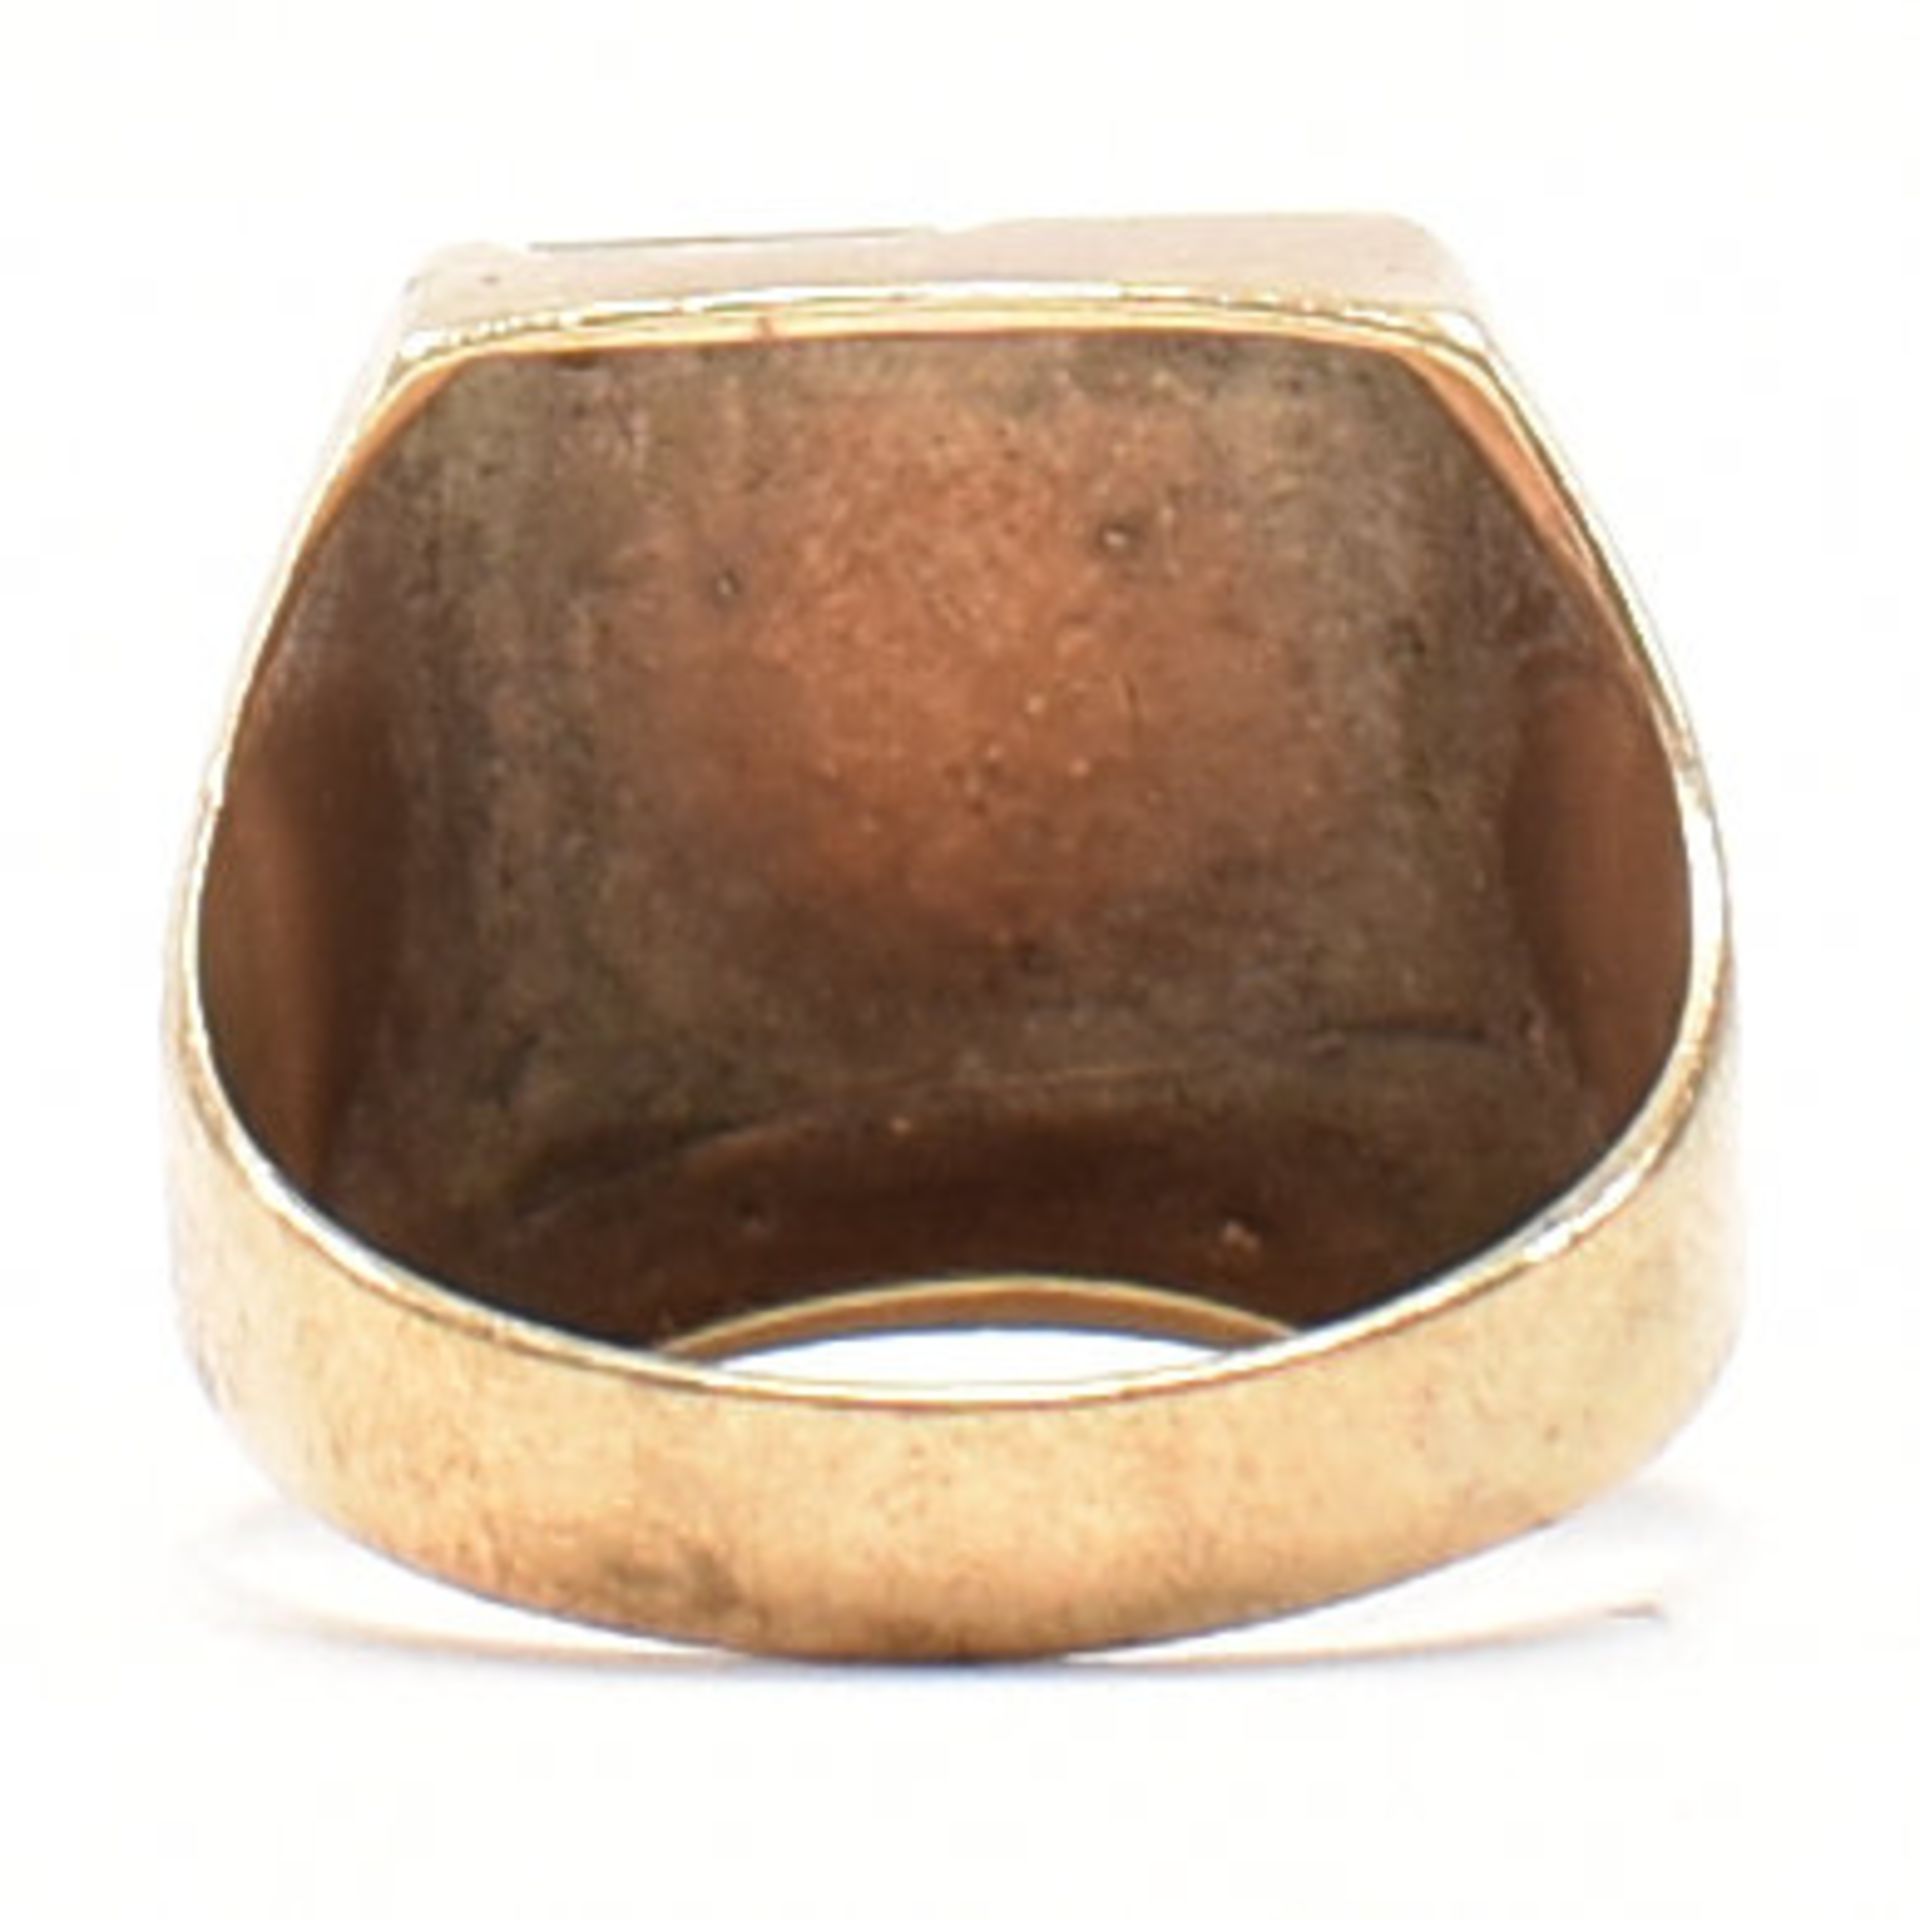 HALLMARKED 9CT GOLD & ONYX RING - Image 7 of 10